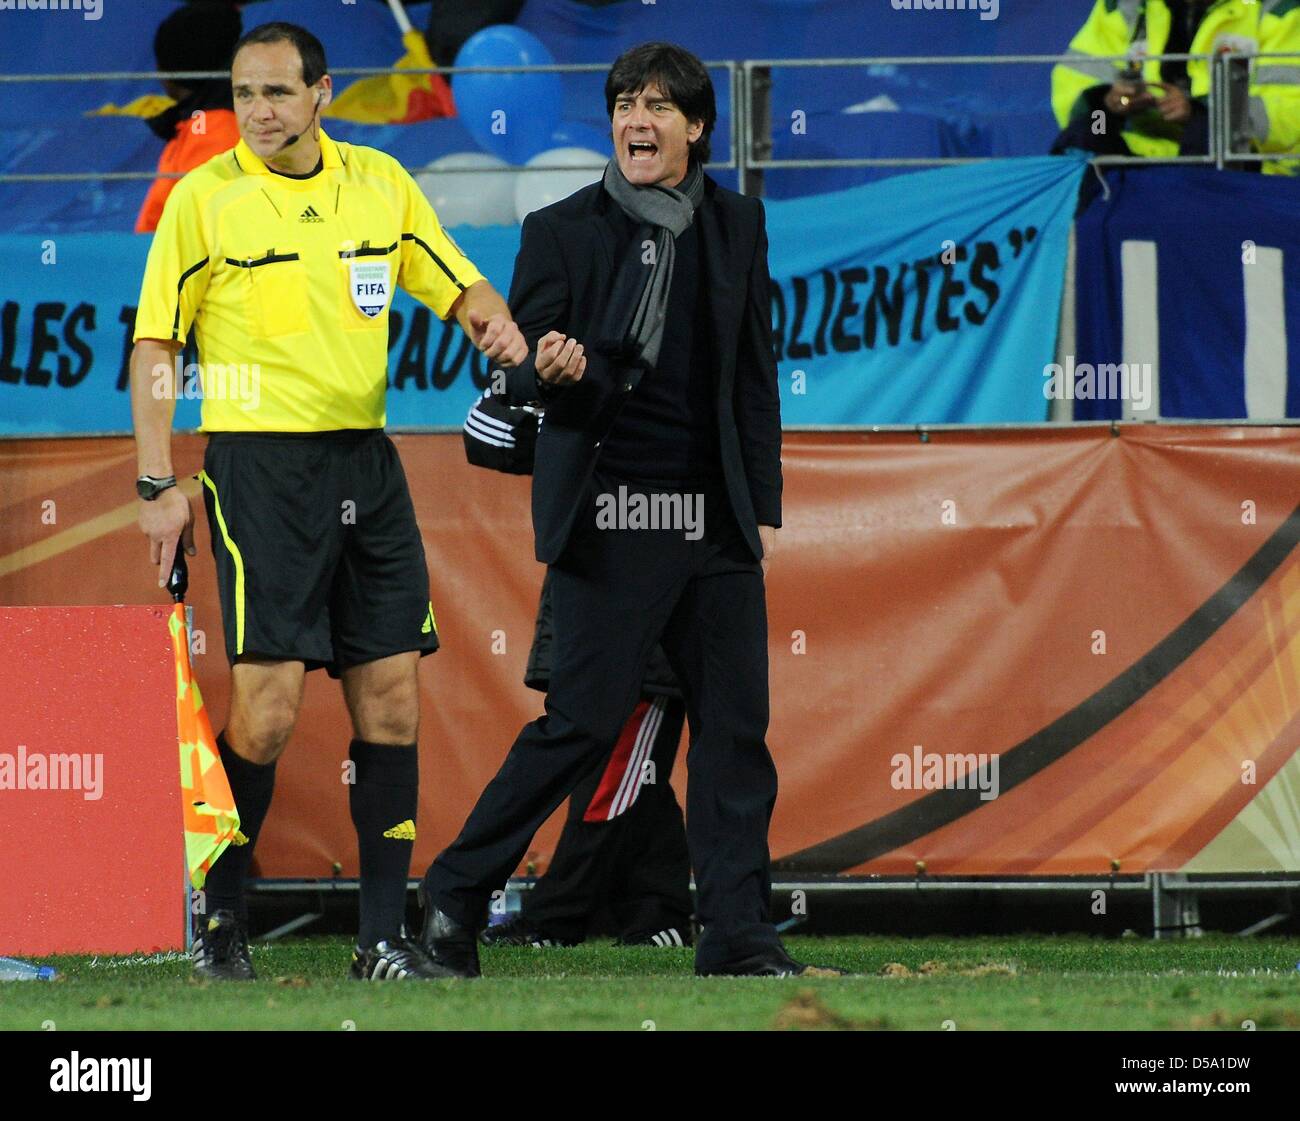 German coach Joachim Loew gestures next to a linesman during the 2010 FIFA World Cup third place match between Uruguay and Germany at the Nelson Mandela Bay Stadium in Port Elizabeth, South Africa 10 July 2010. Germany won 3:2. Photo: Marcus Brandt dpa - Please refer to http://dpaq.de/FIFA-WM2010-TC Stock Photo